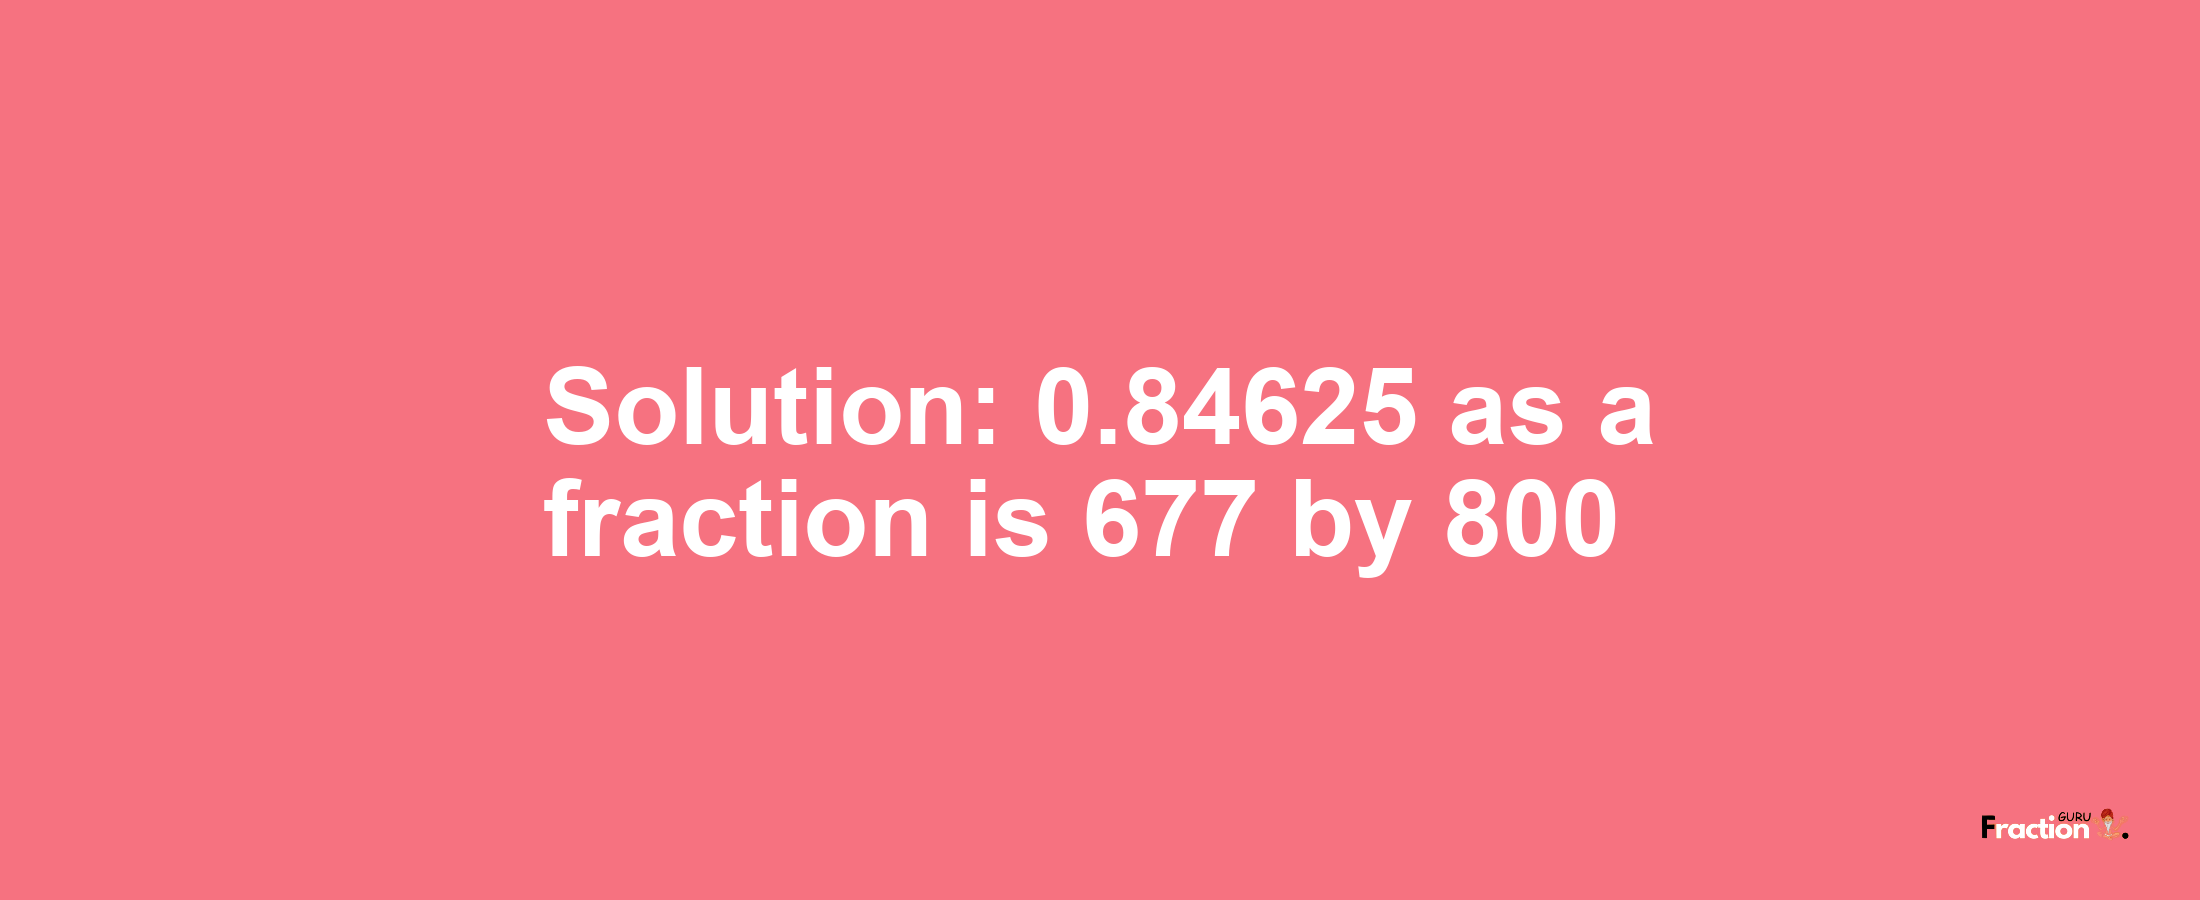 Solution:0.84625 as a fraction is 677/800